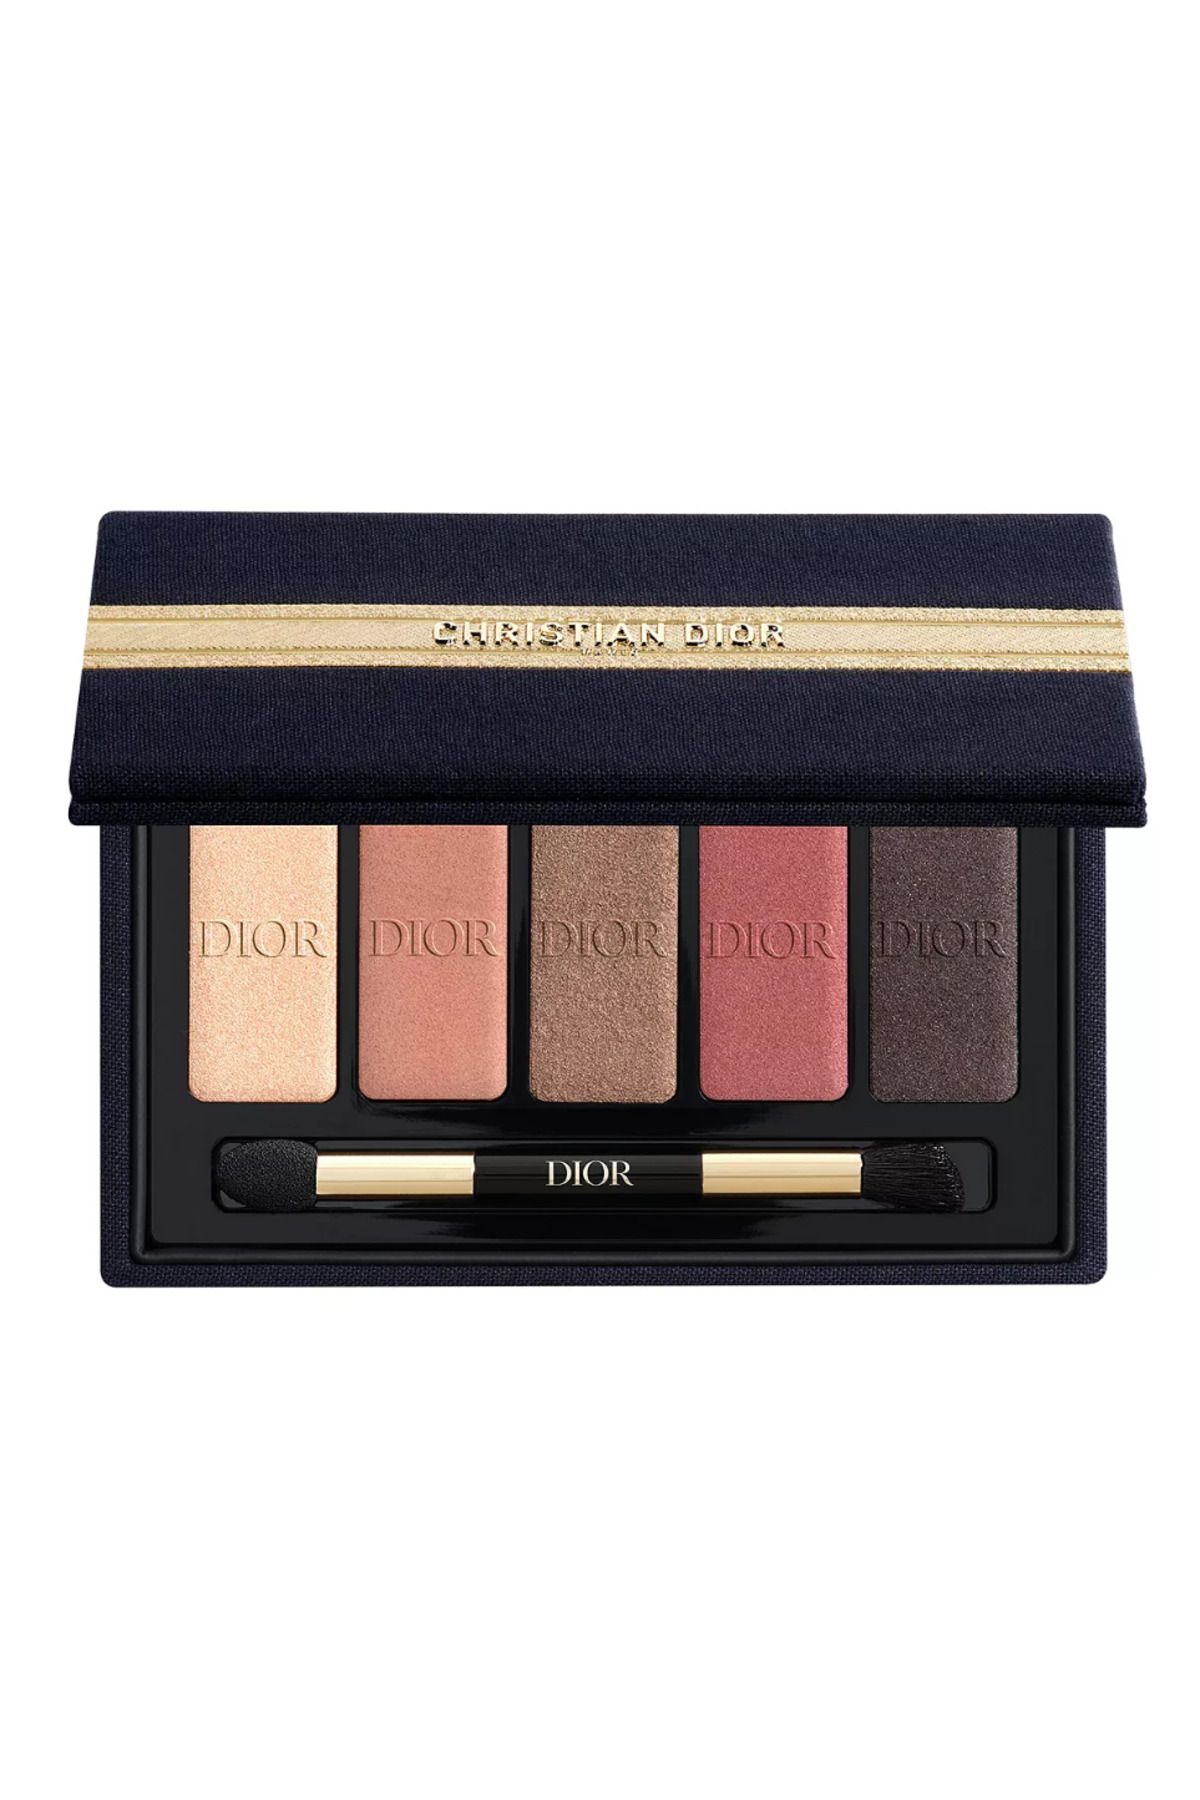 Dior Iconic Couture Eye Makeup Palette